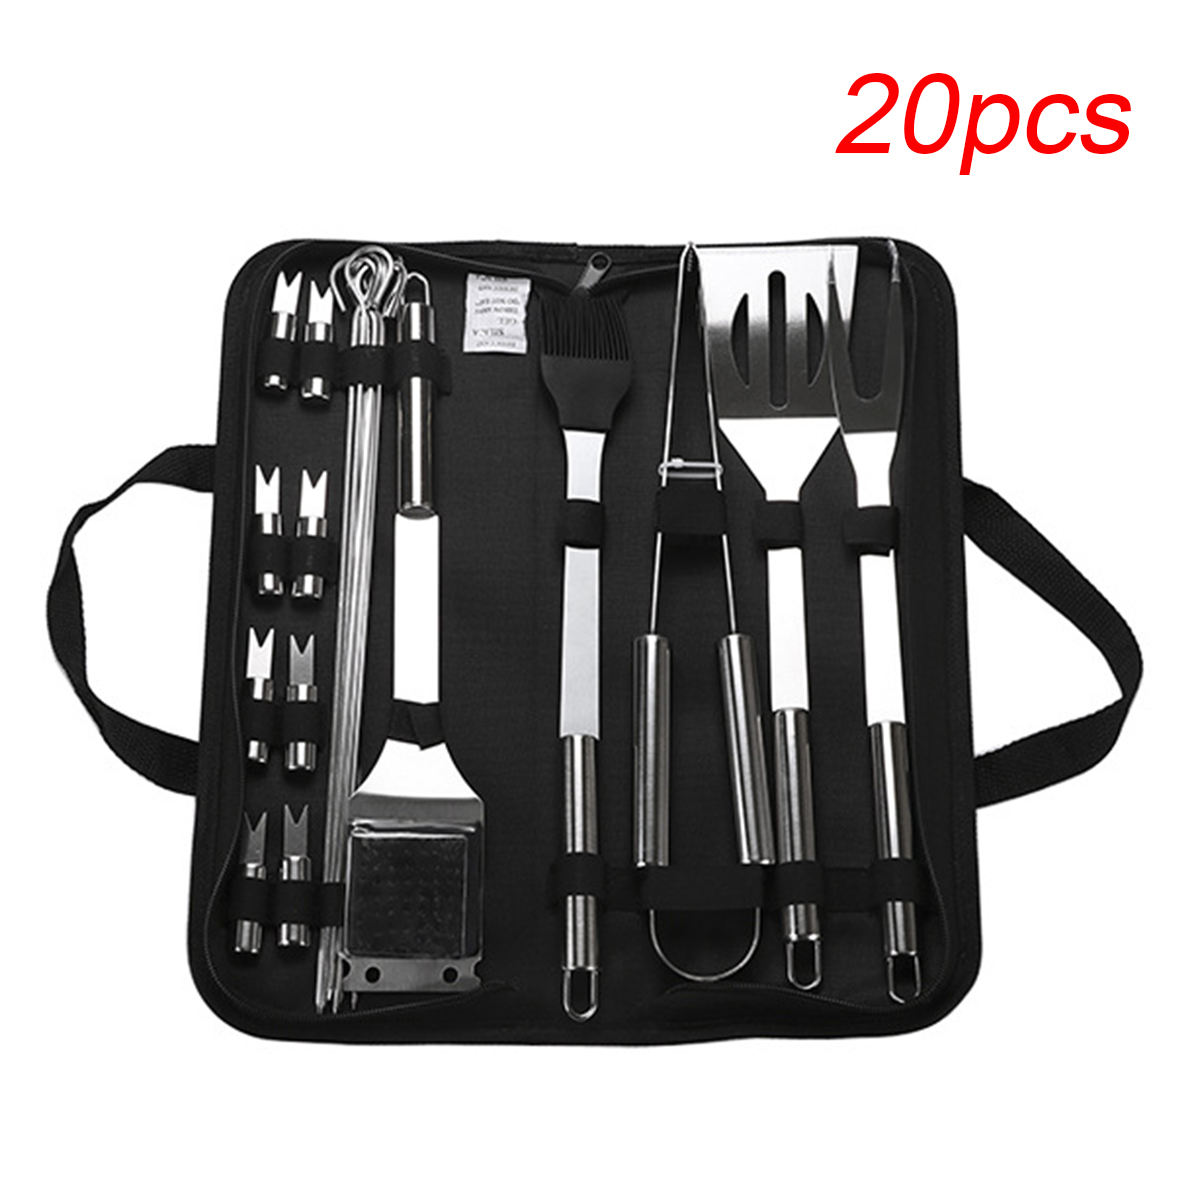 Stainless-Steel-BBQ-Tools-Set-Barbecue-Grilling-Utensil-Accessories-Camping-Outdoor-Cooking-1676473-2